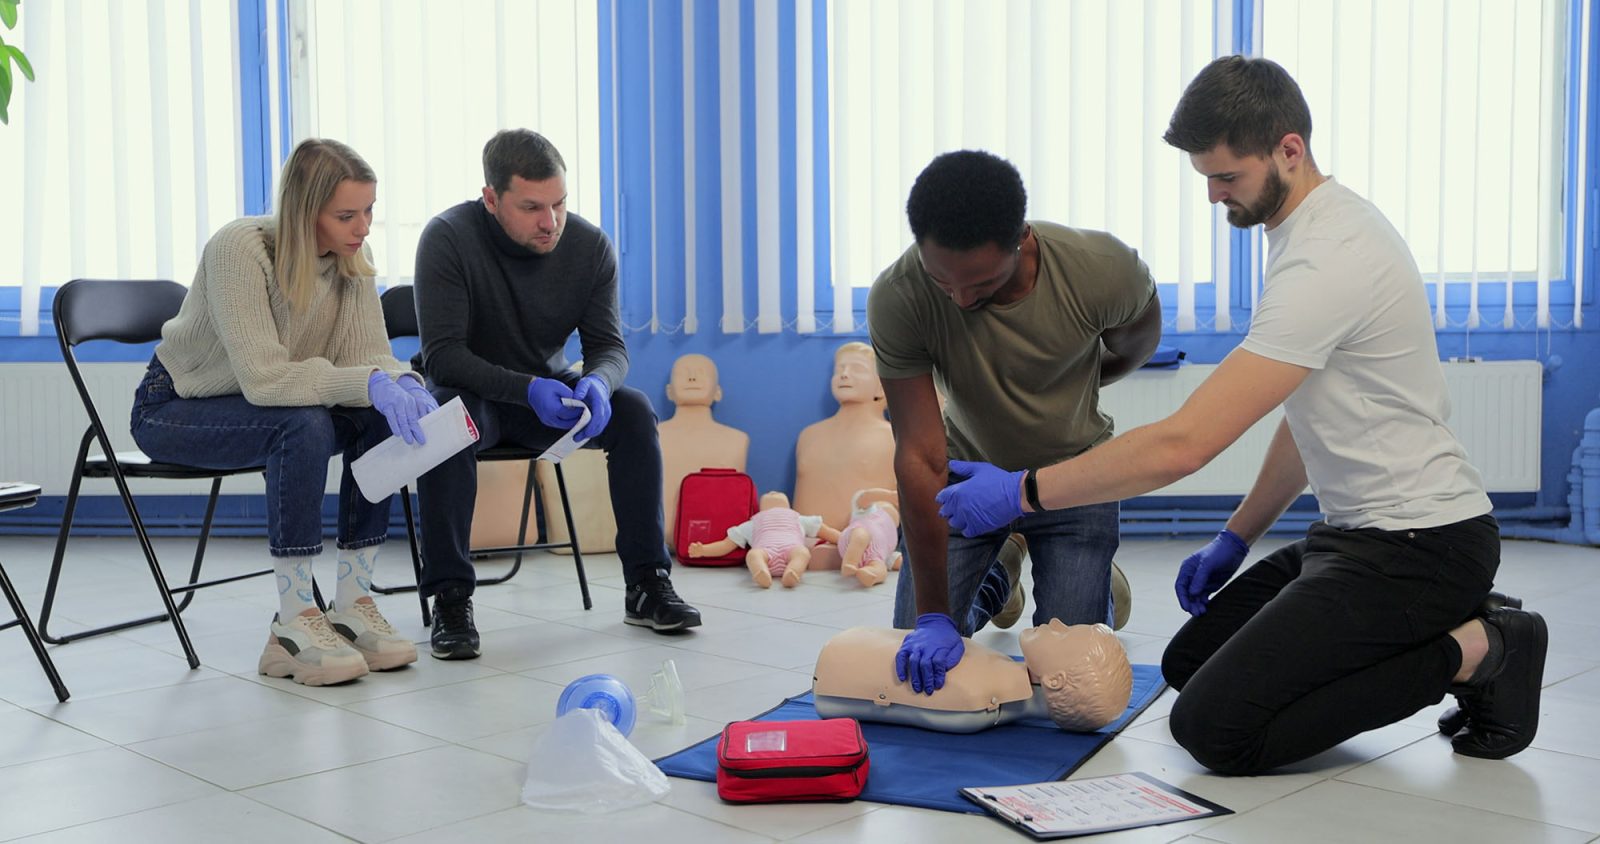 Group of people CPR First Aid Training course. CPR teen dummy first aid training.